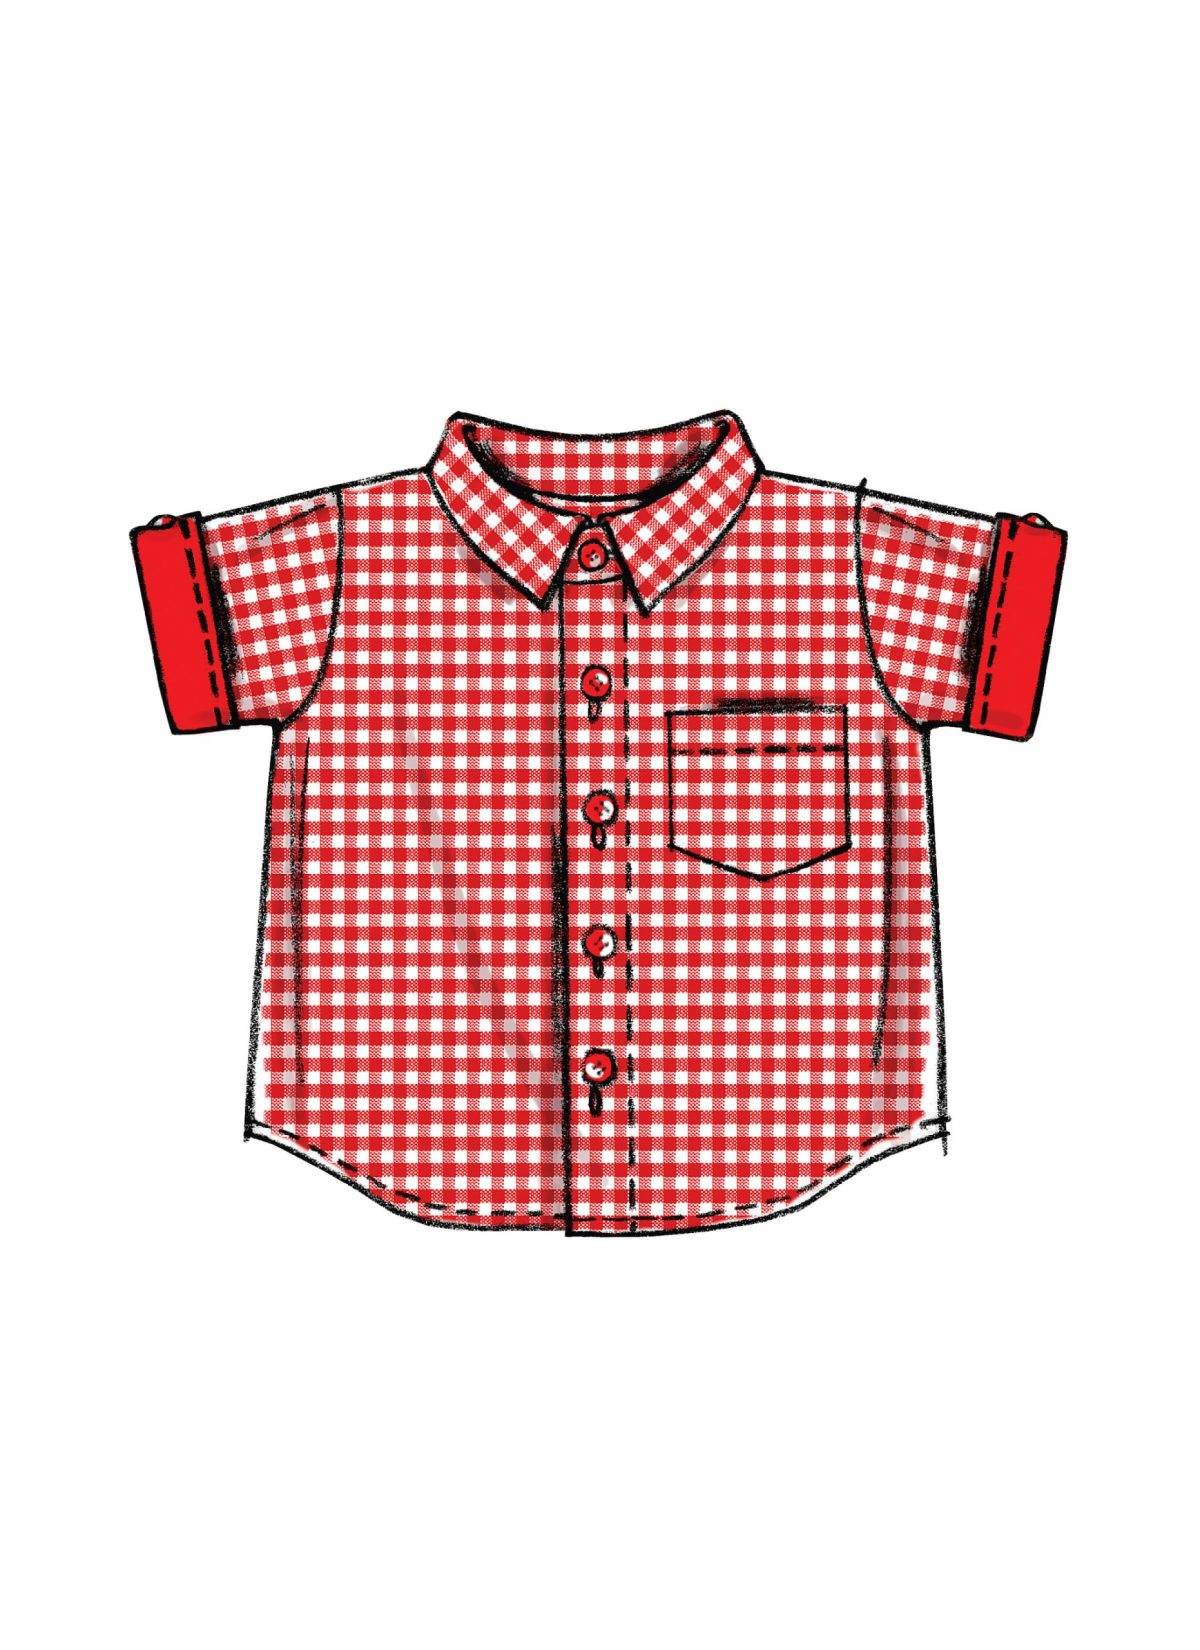 McCall's Sewing Pattern M6016 Infants' Shirts, Shorts And Pants